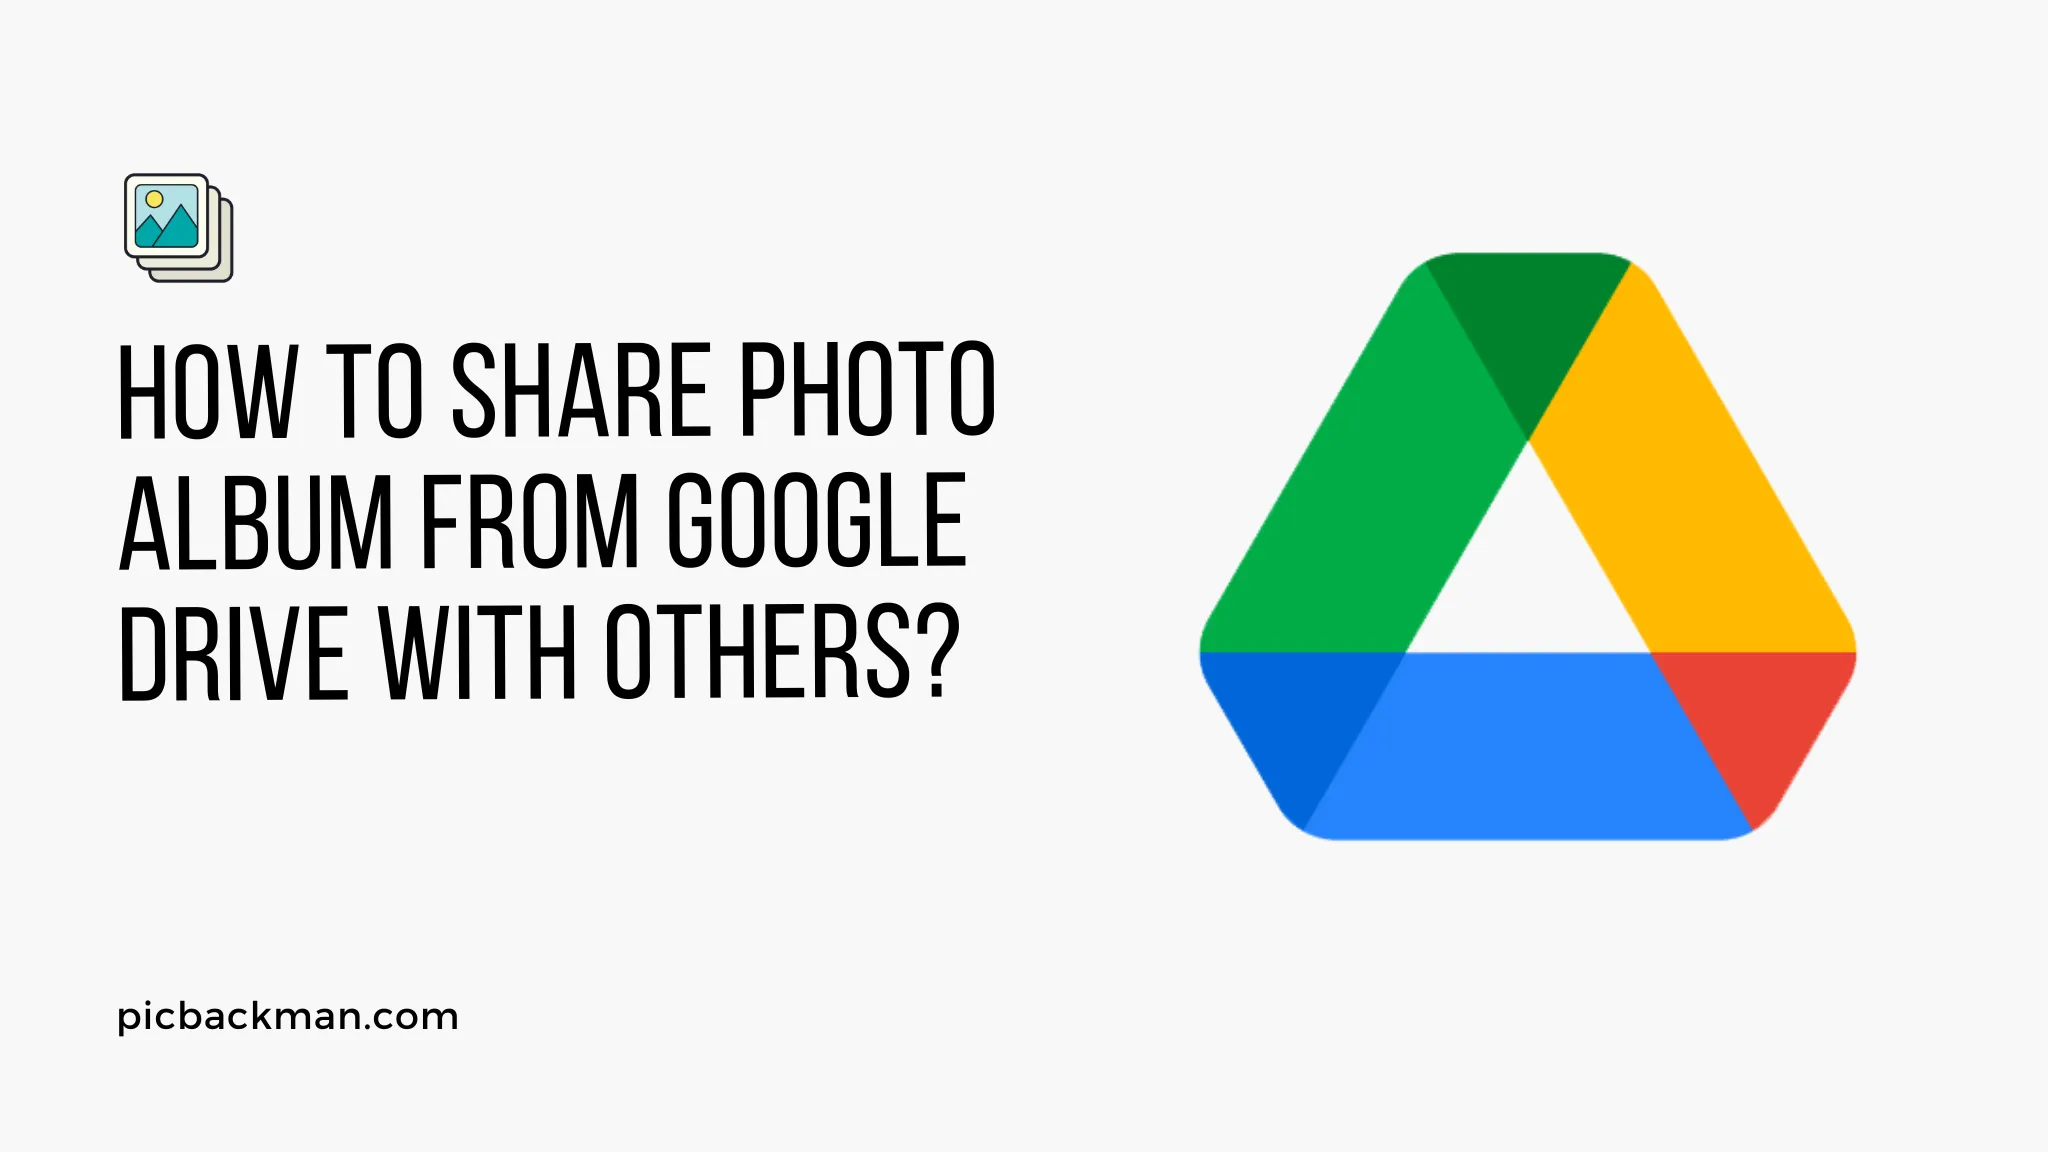 How to Share Photo Album from Google Drive with others?